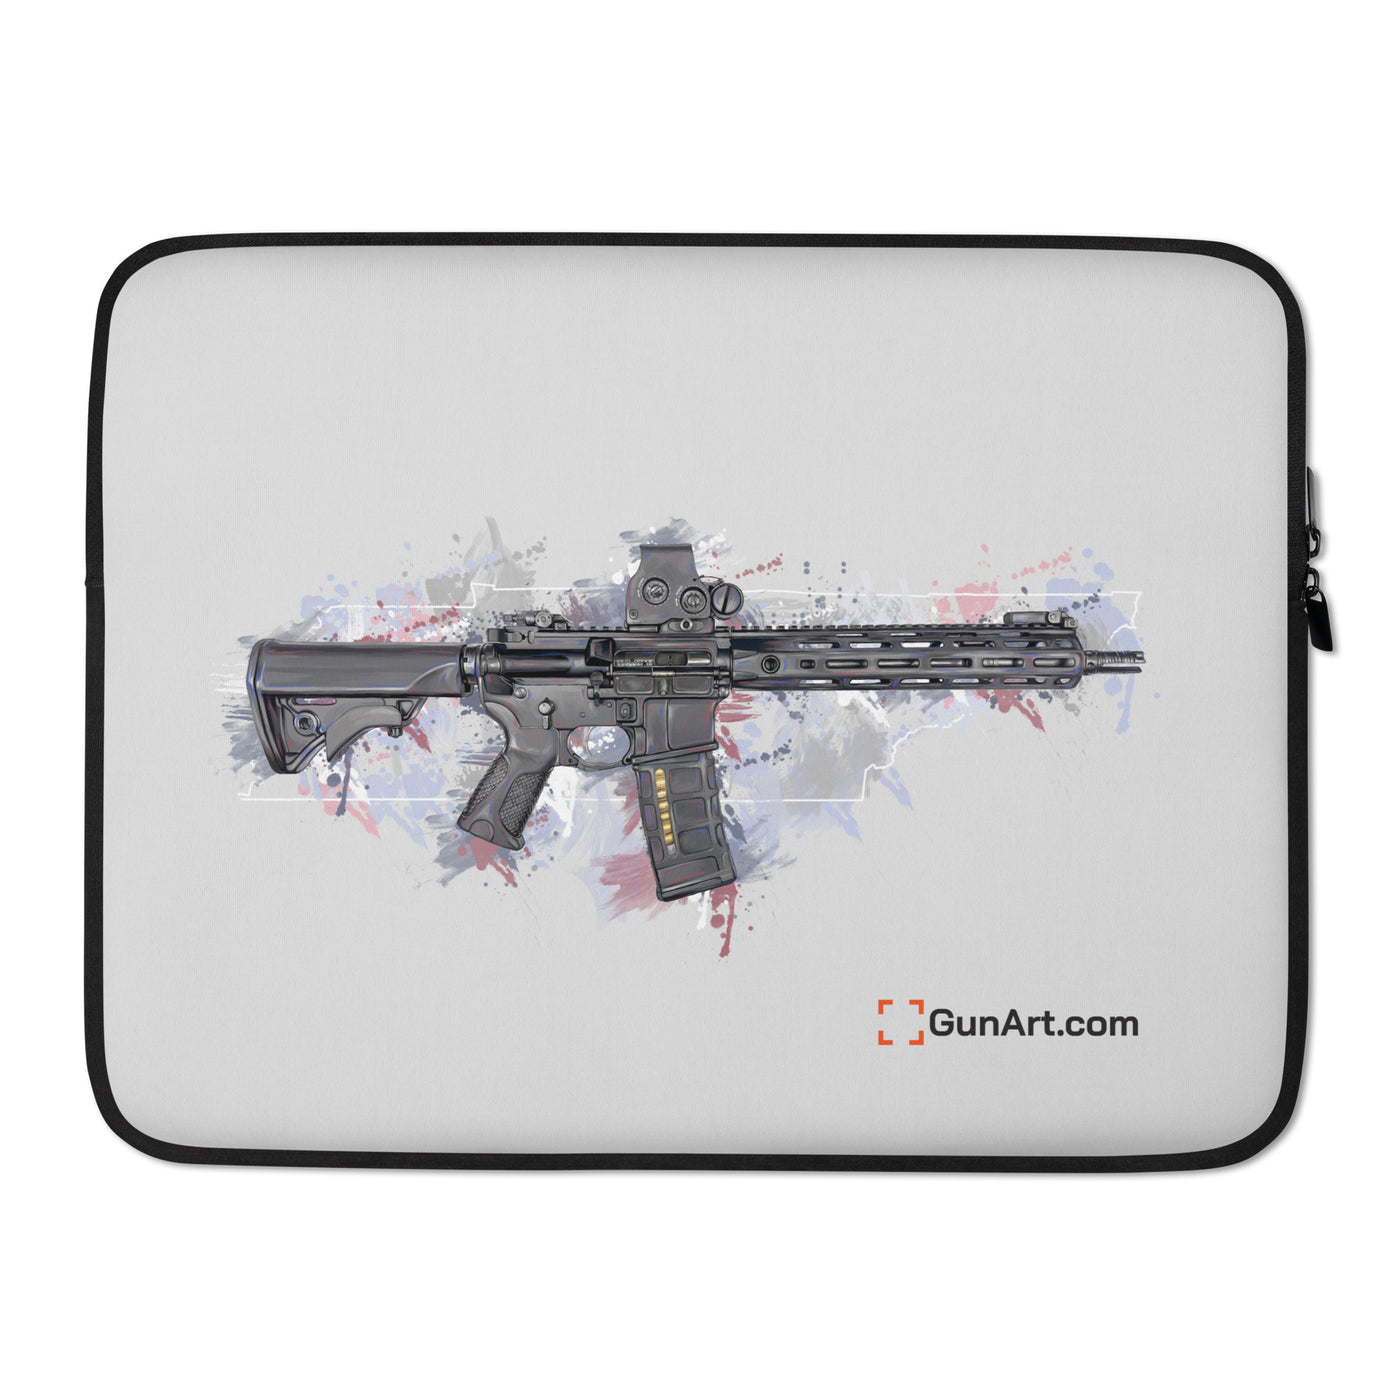 Defending Freedom - Tennessee - AR-15 State Laptop Sleeve - White State